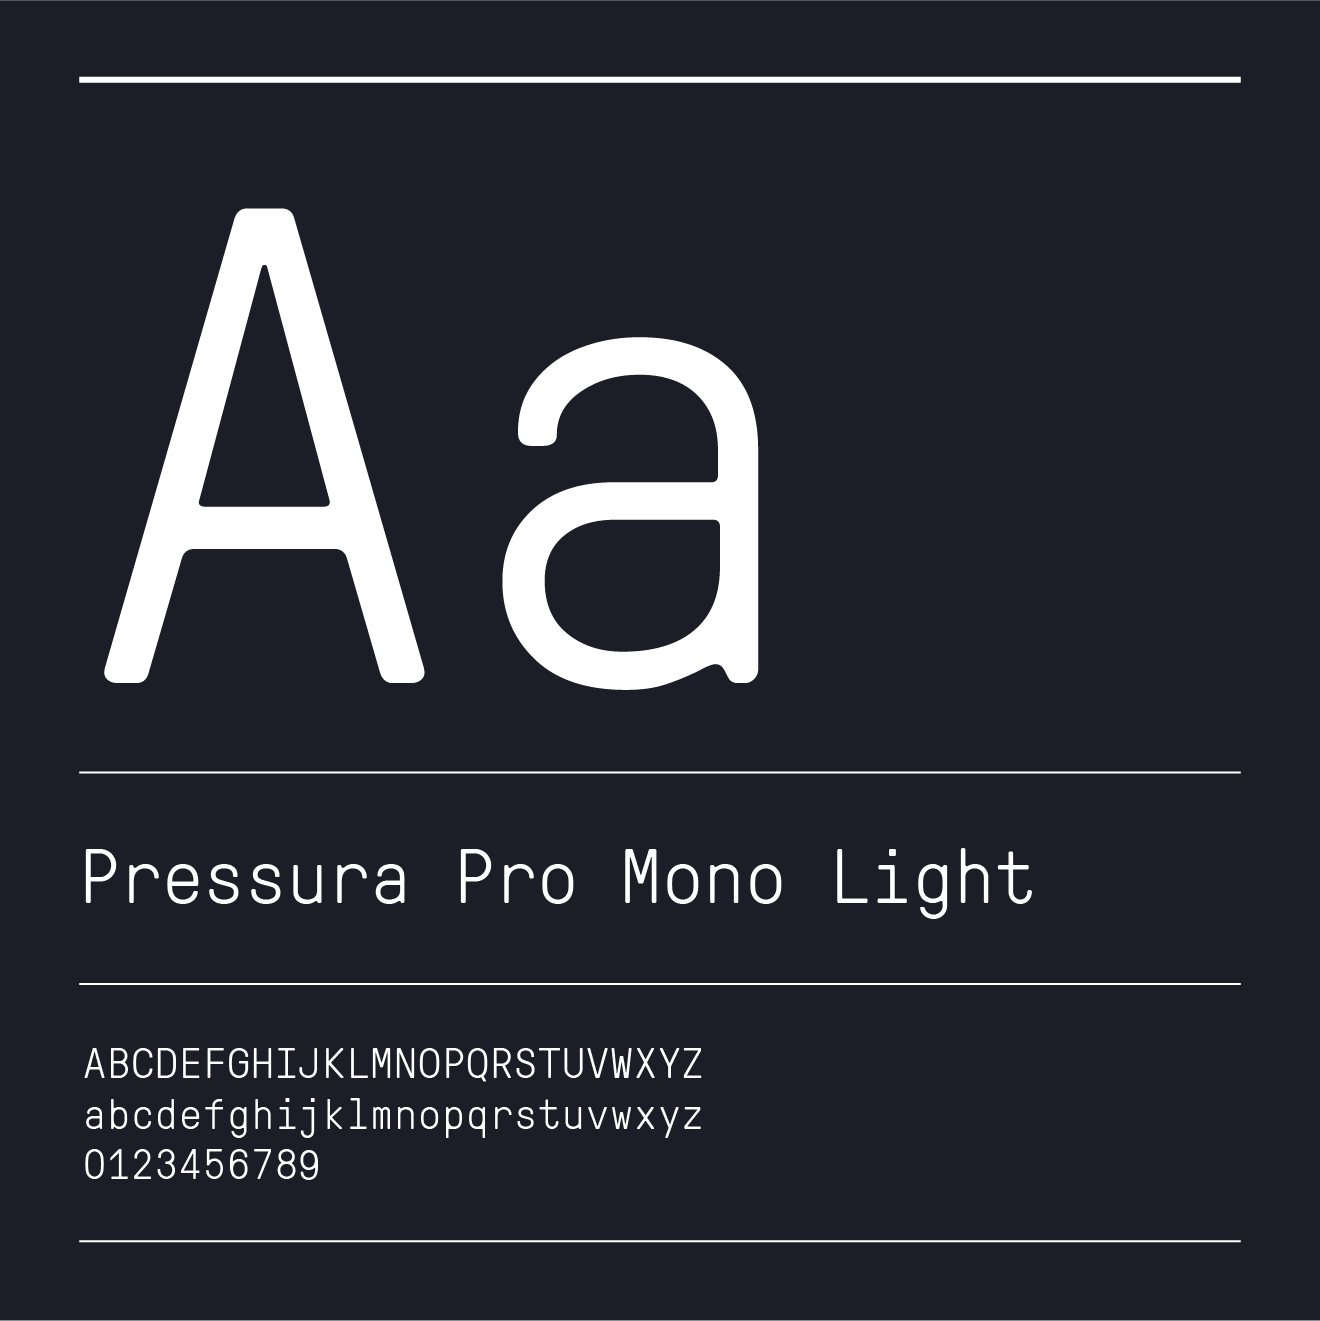 White text of the letter A over a black background in Pressura Pro Mono Light font